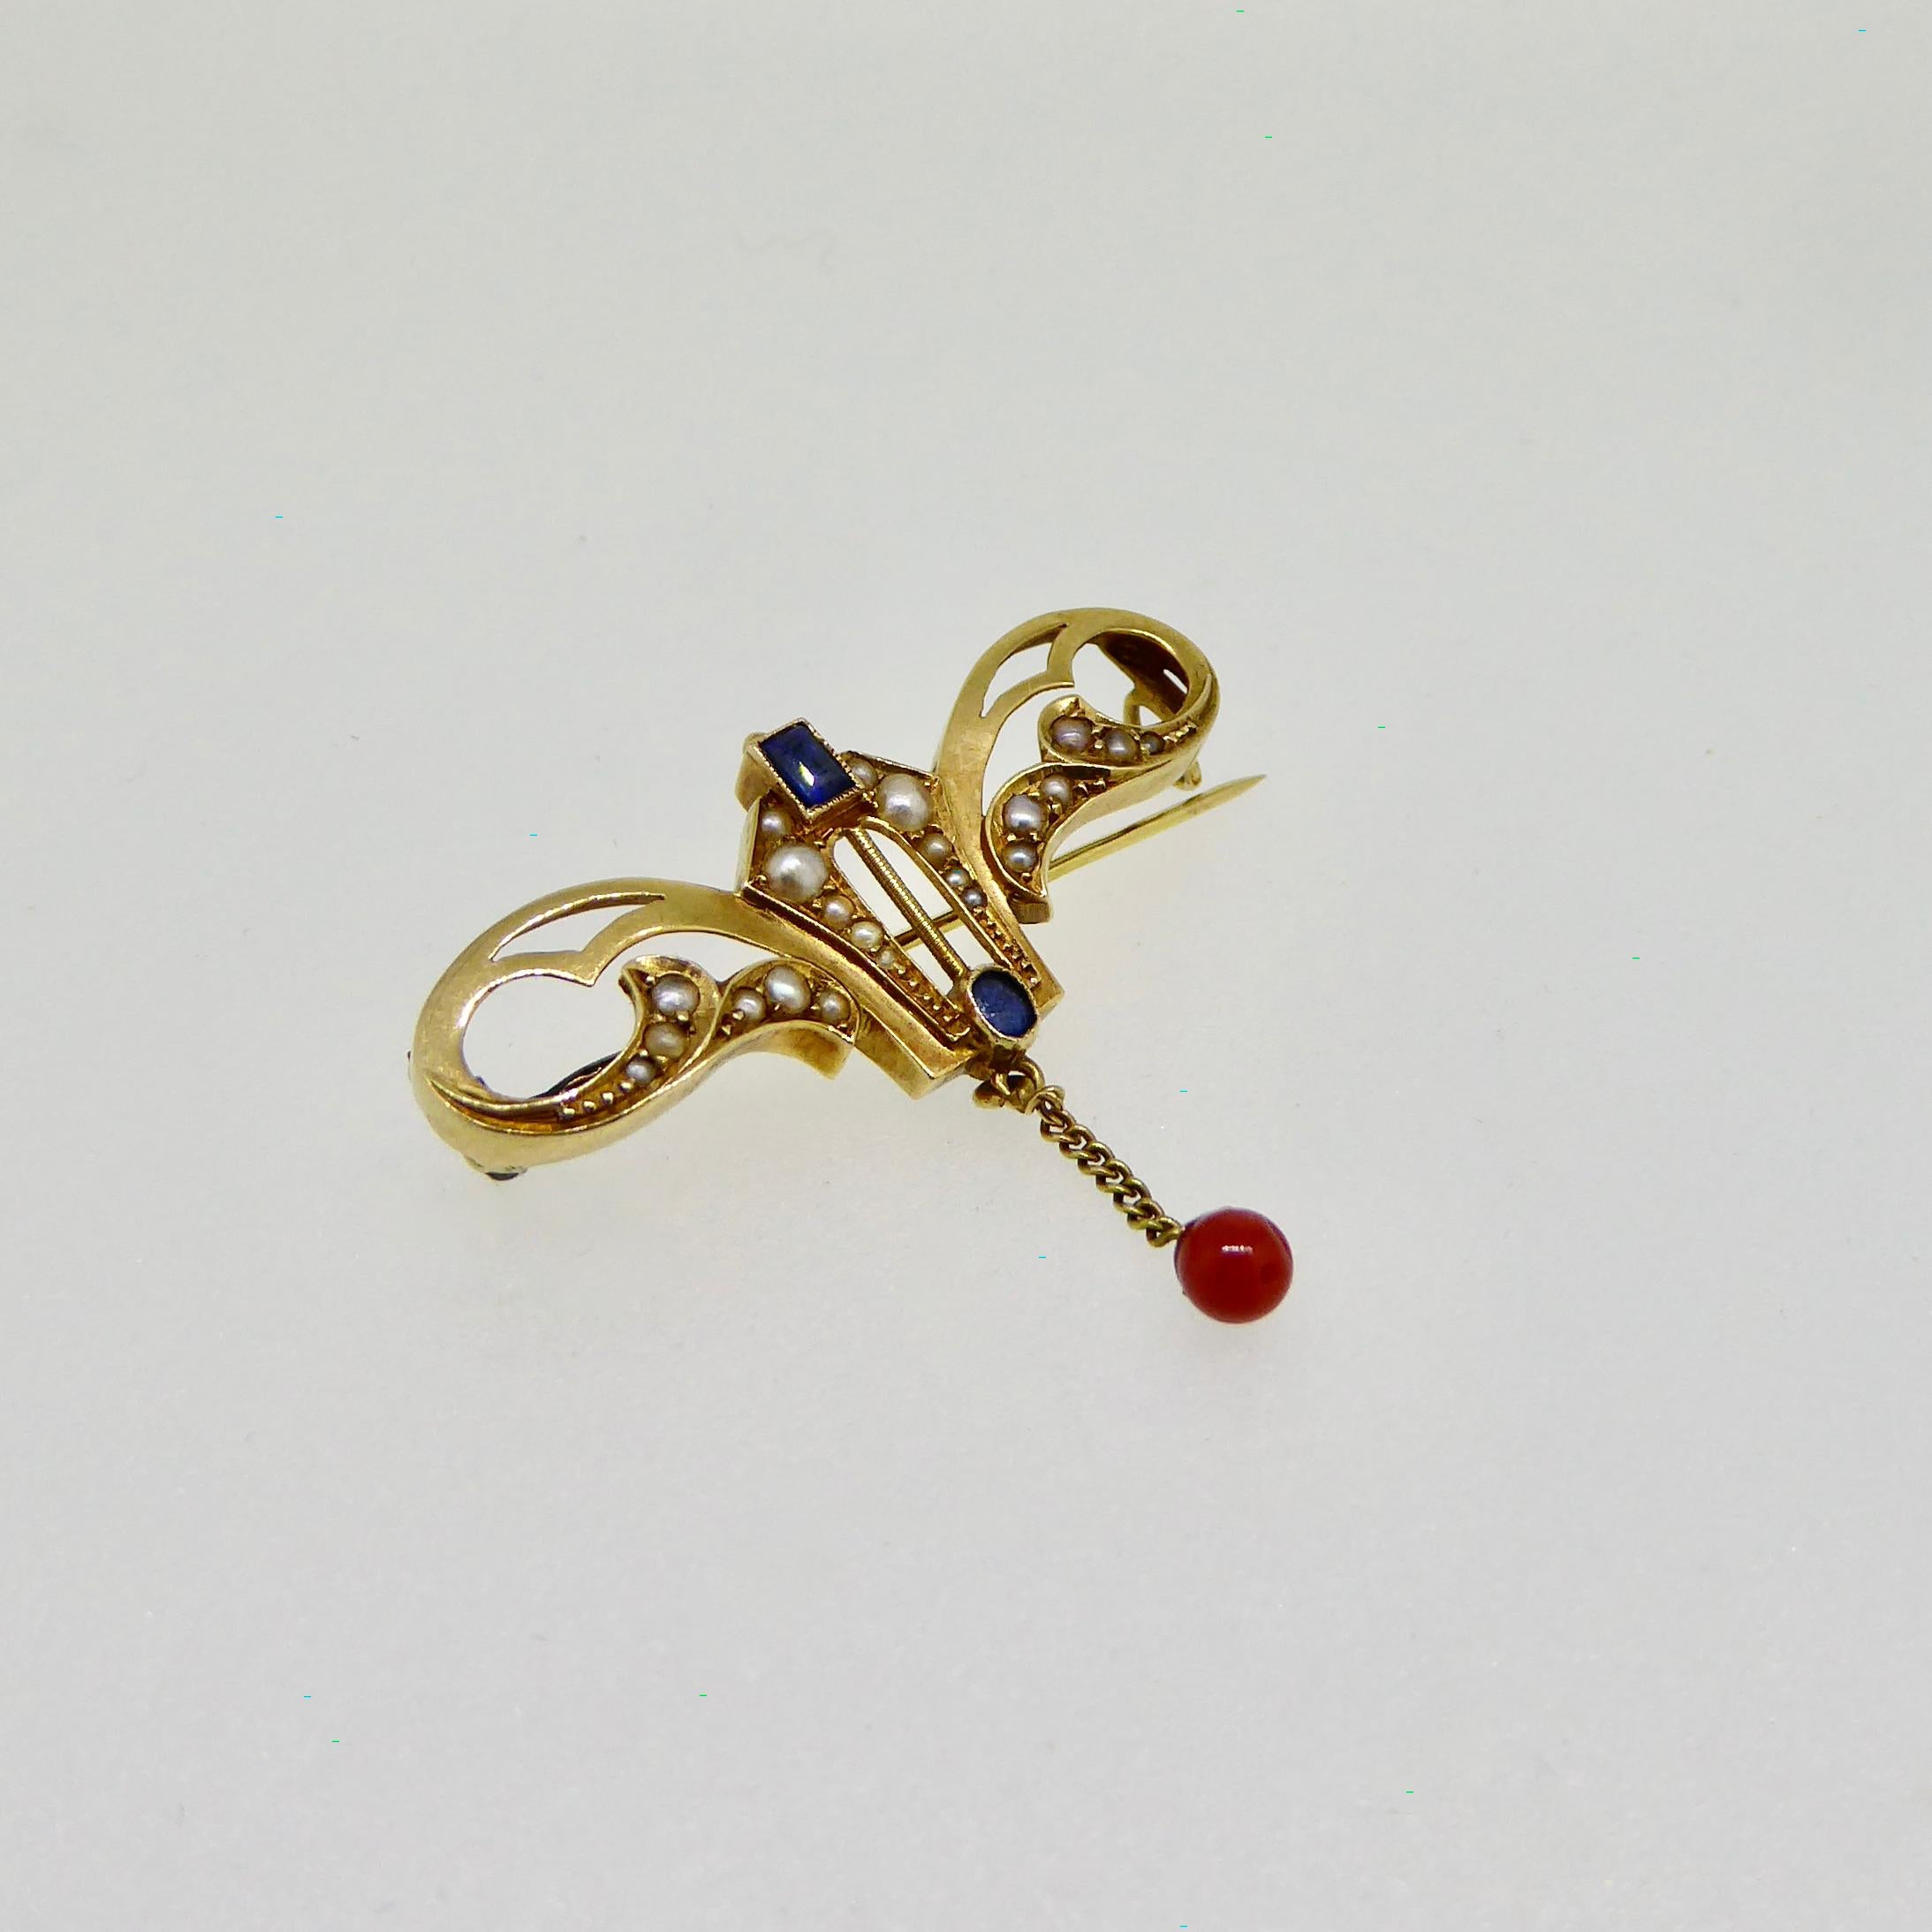 Oval Cut Brooche, Art Nouveau, Yellow Gold, Pearl, Sapphire, Red Coral, 1910